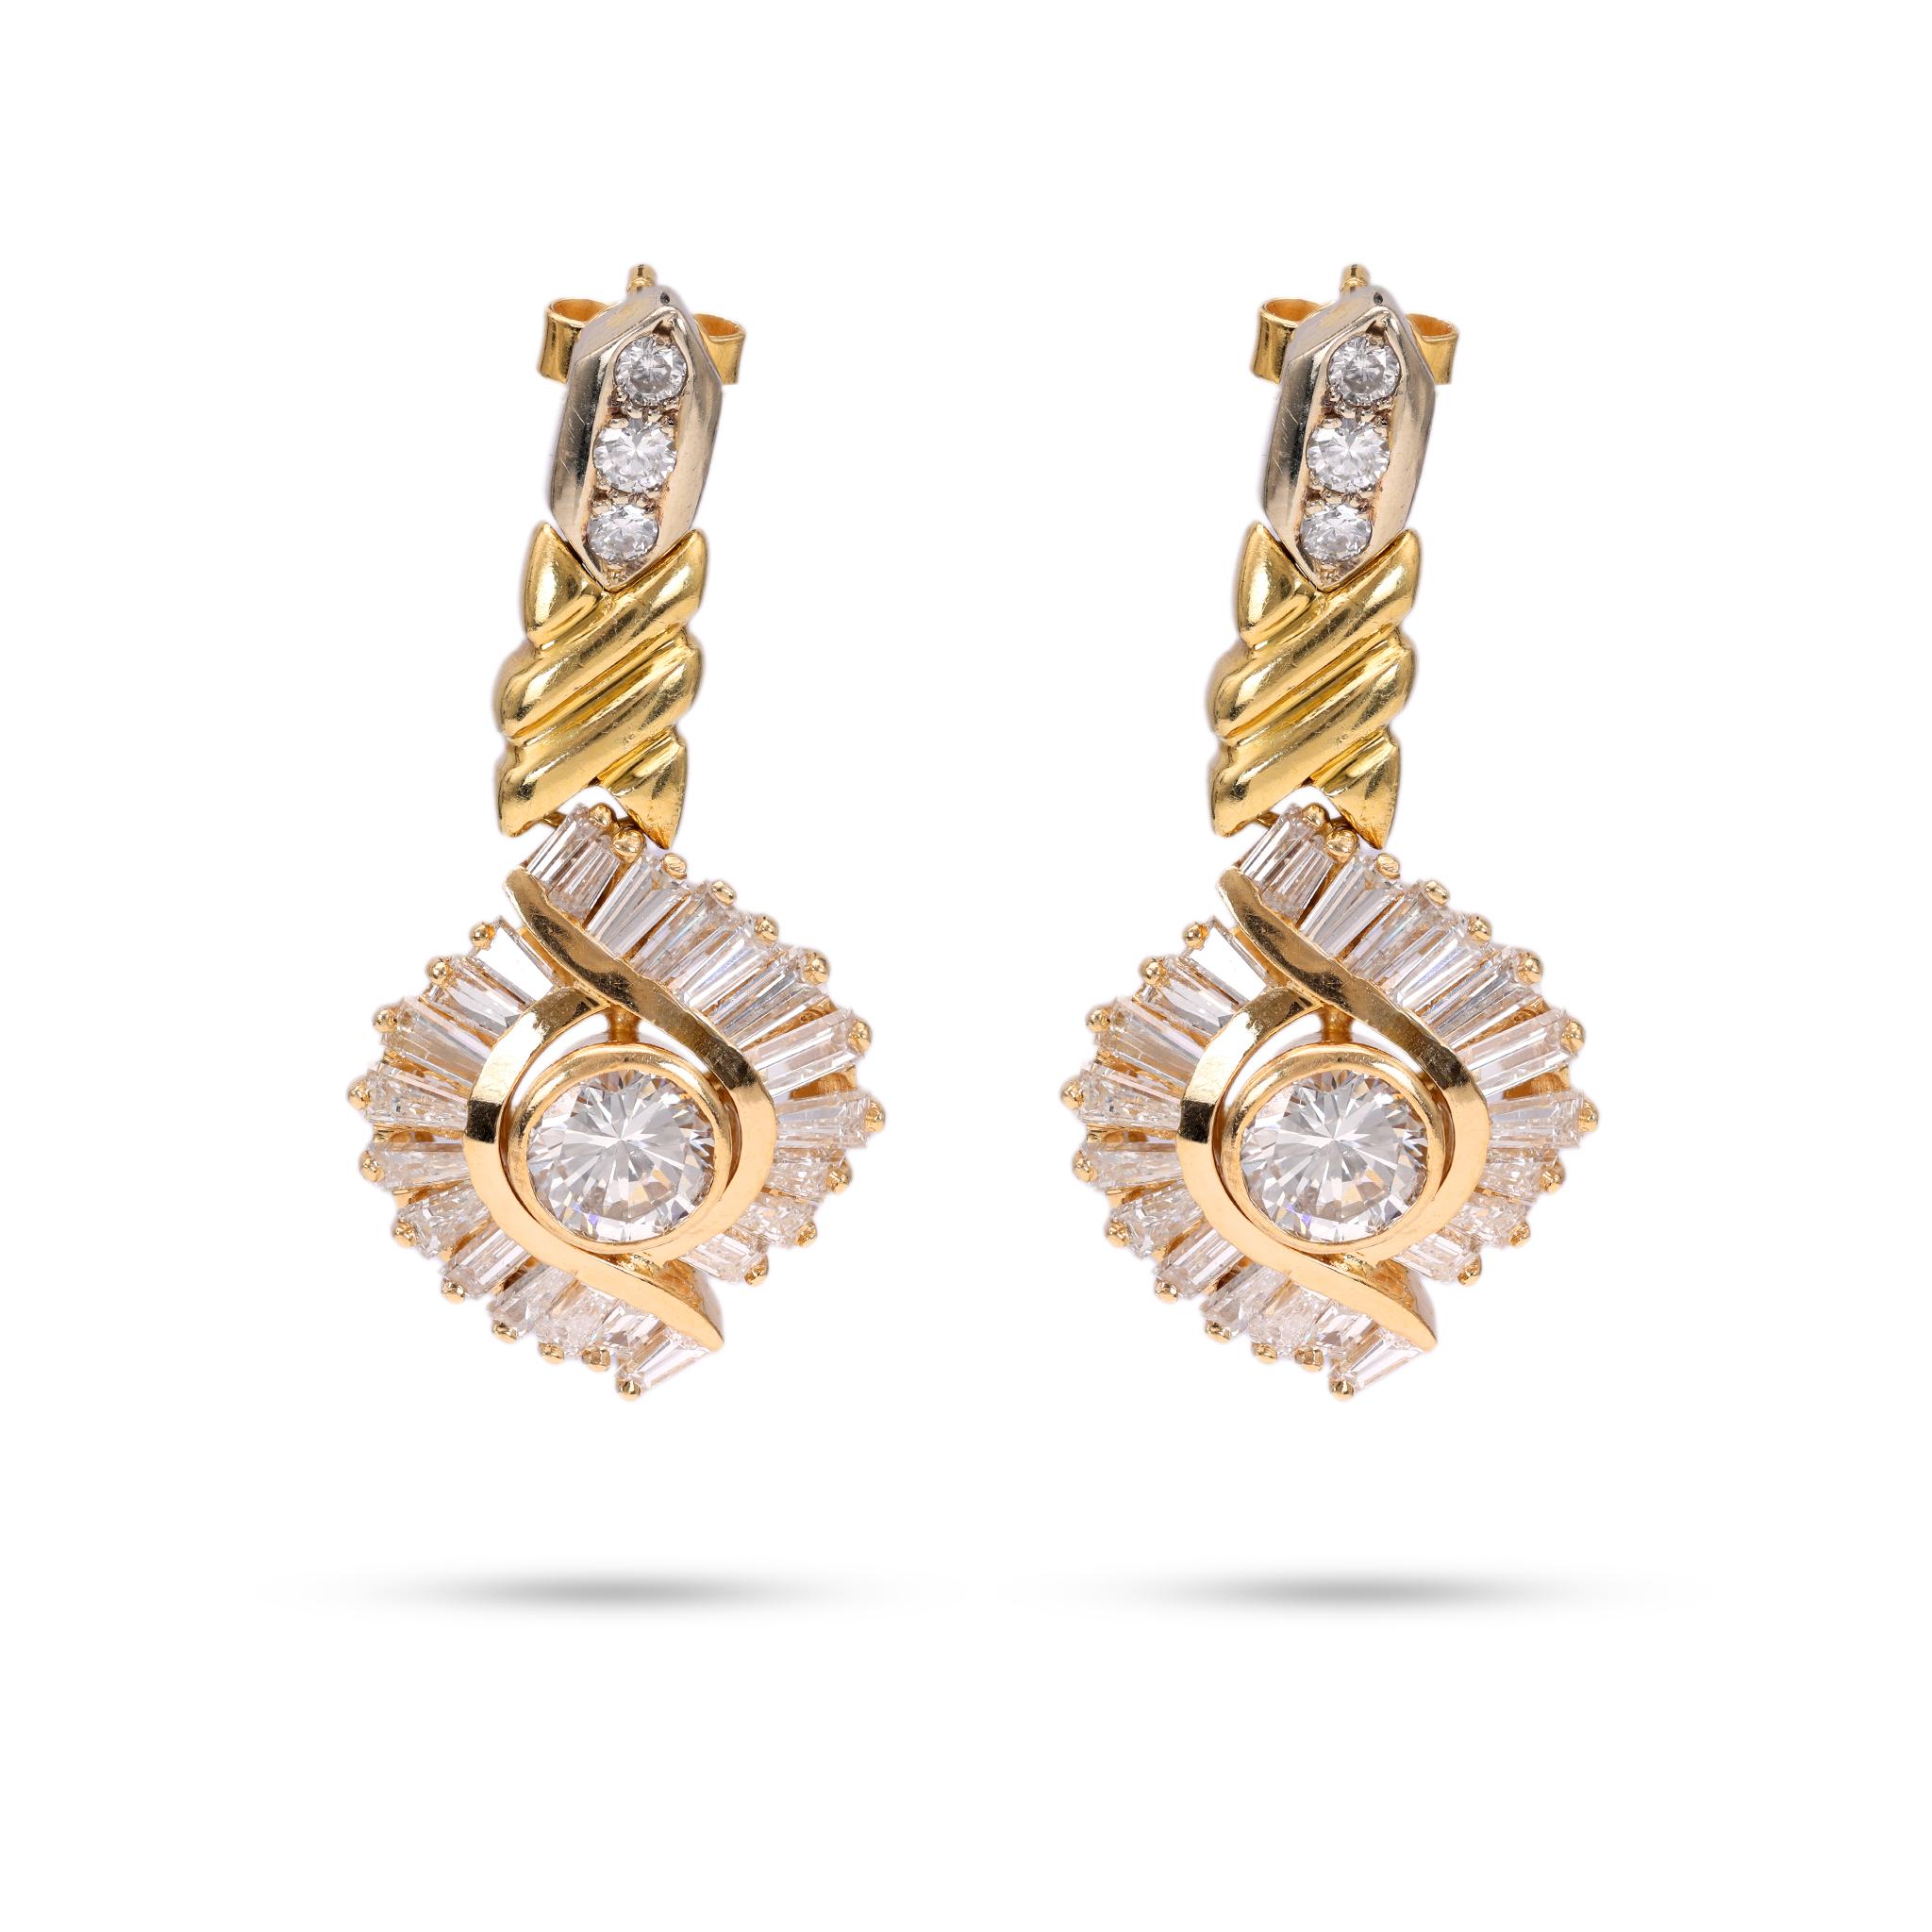 5.10 Carat Diamond 18k Yellow Gold Earrings In Excellent Condition For Sale In Beverly Hills, CA